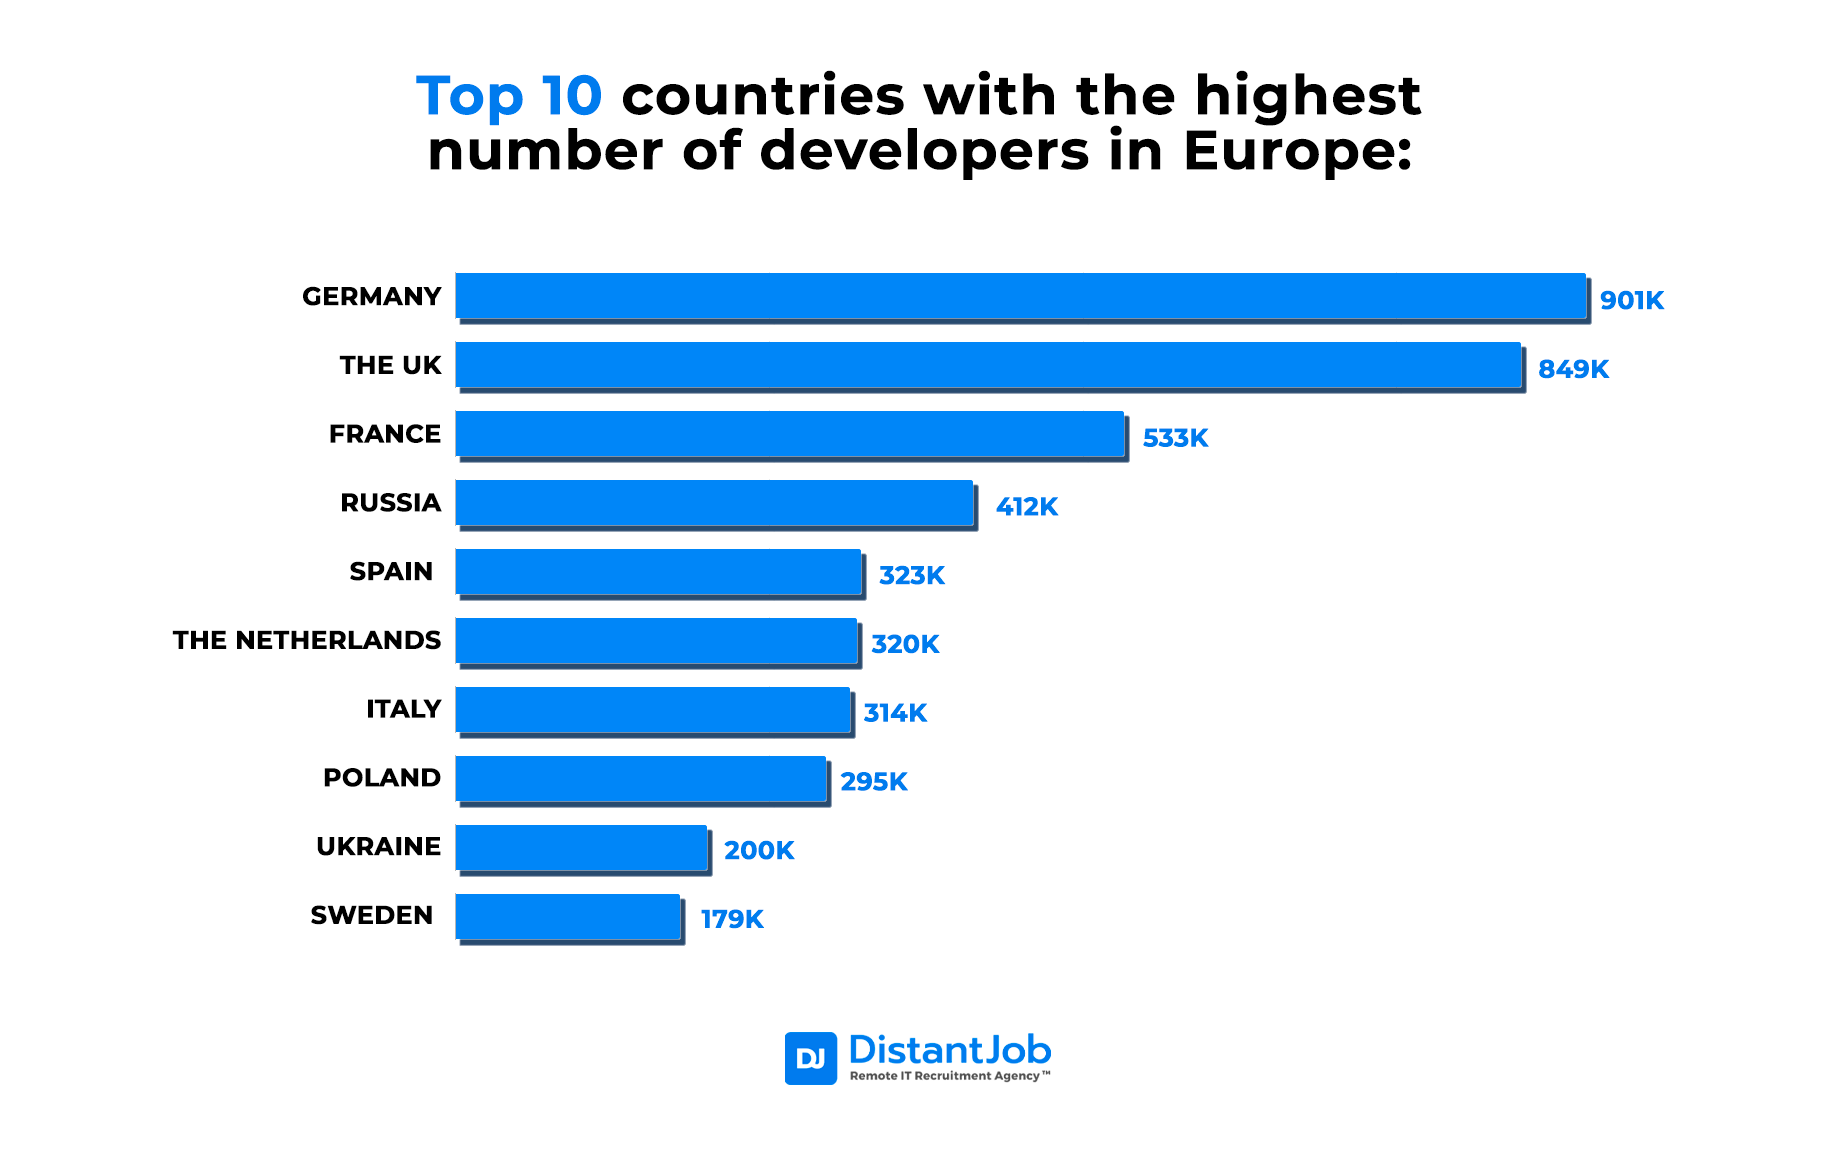 Top 10 countries with the highest number of developers in Europe